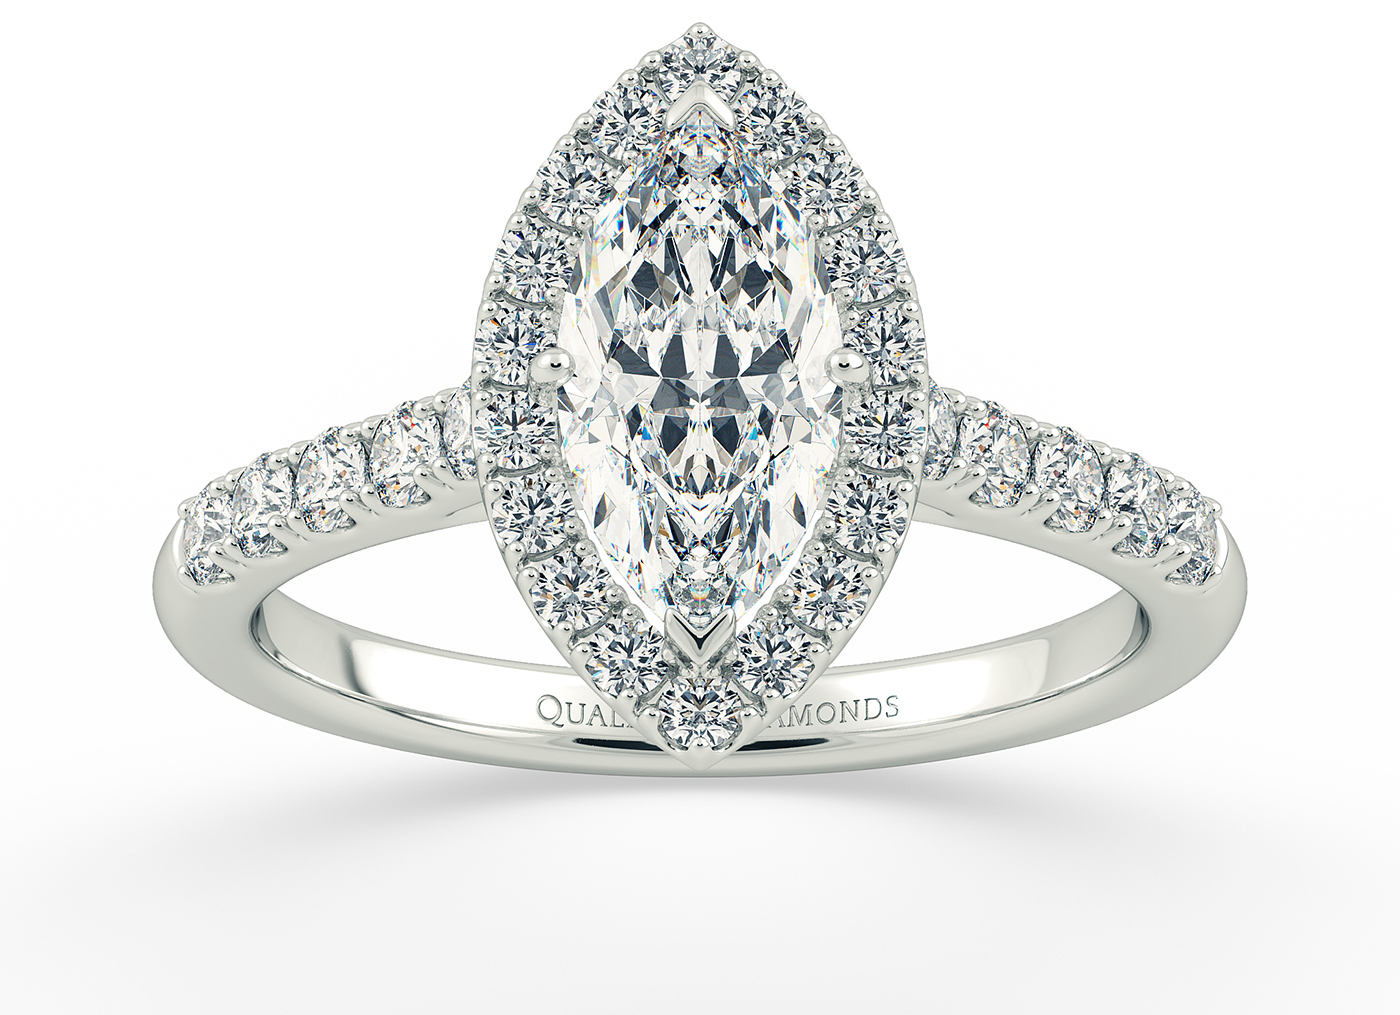 Two Carat Halo Marquise Diamond Ring in 18K White Gold